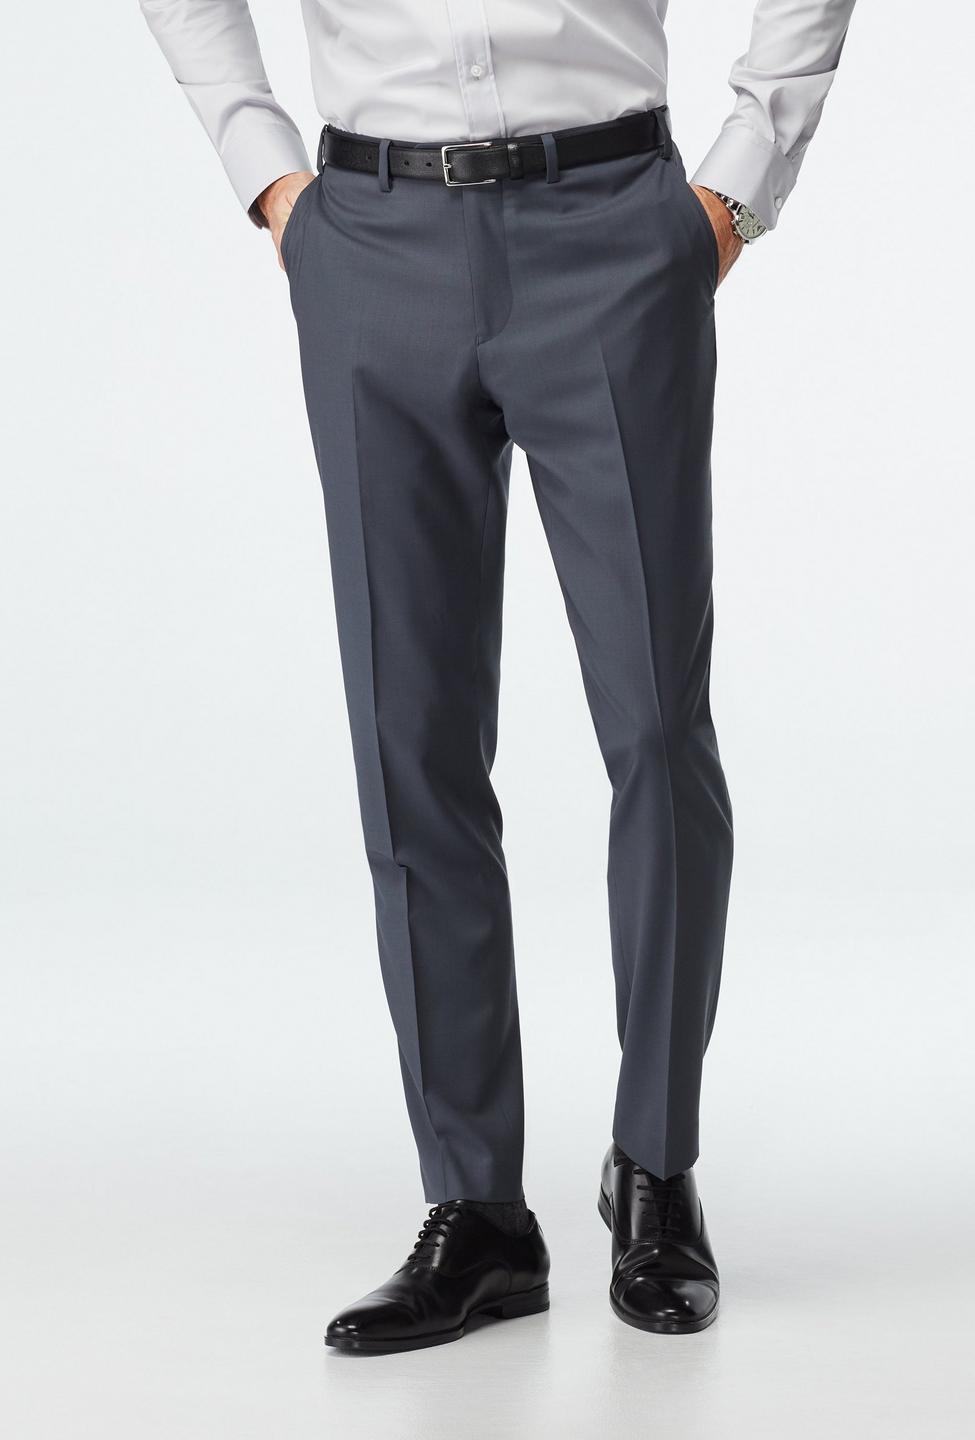 Gray pants - Milano Solid Design from Indochino Collection